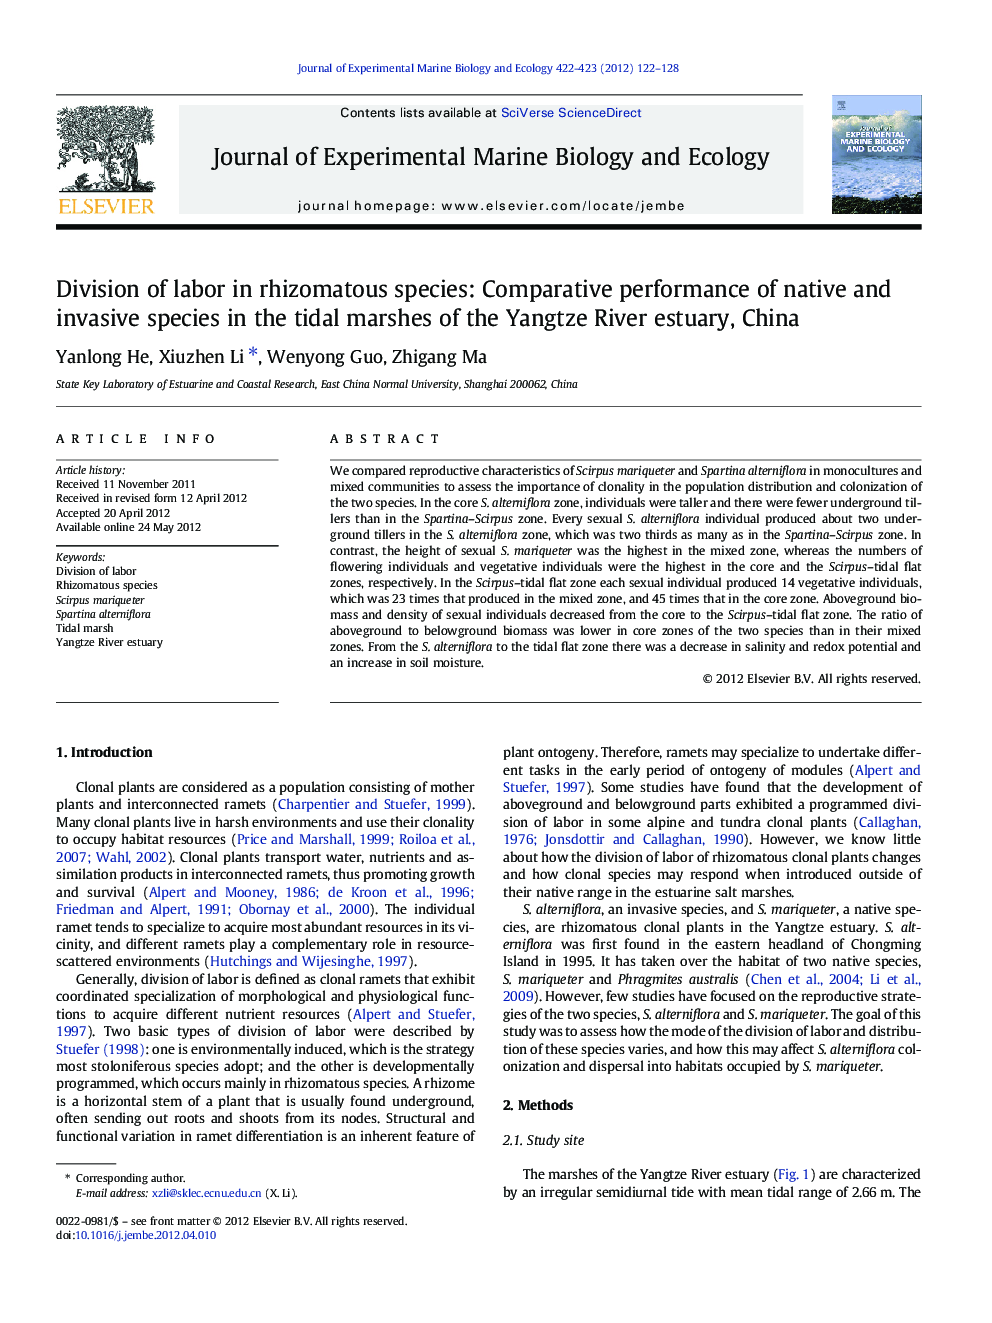 Division of labor in rhizomatous species: Comparative performance of native and invasive species in the tidal marshes of the Yangtze River estuary, China